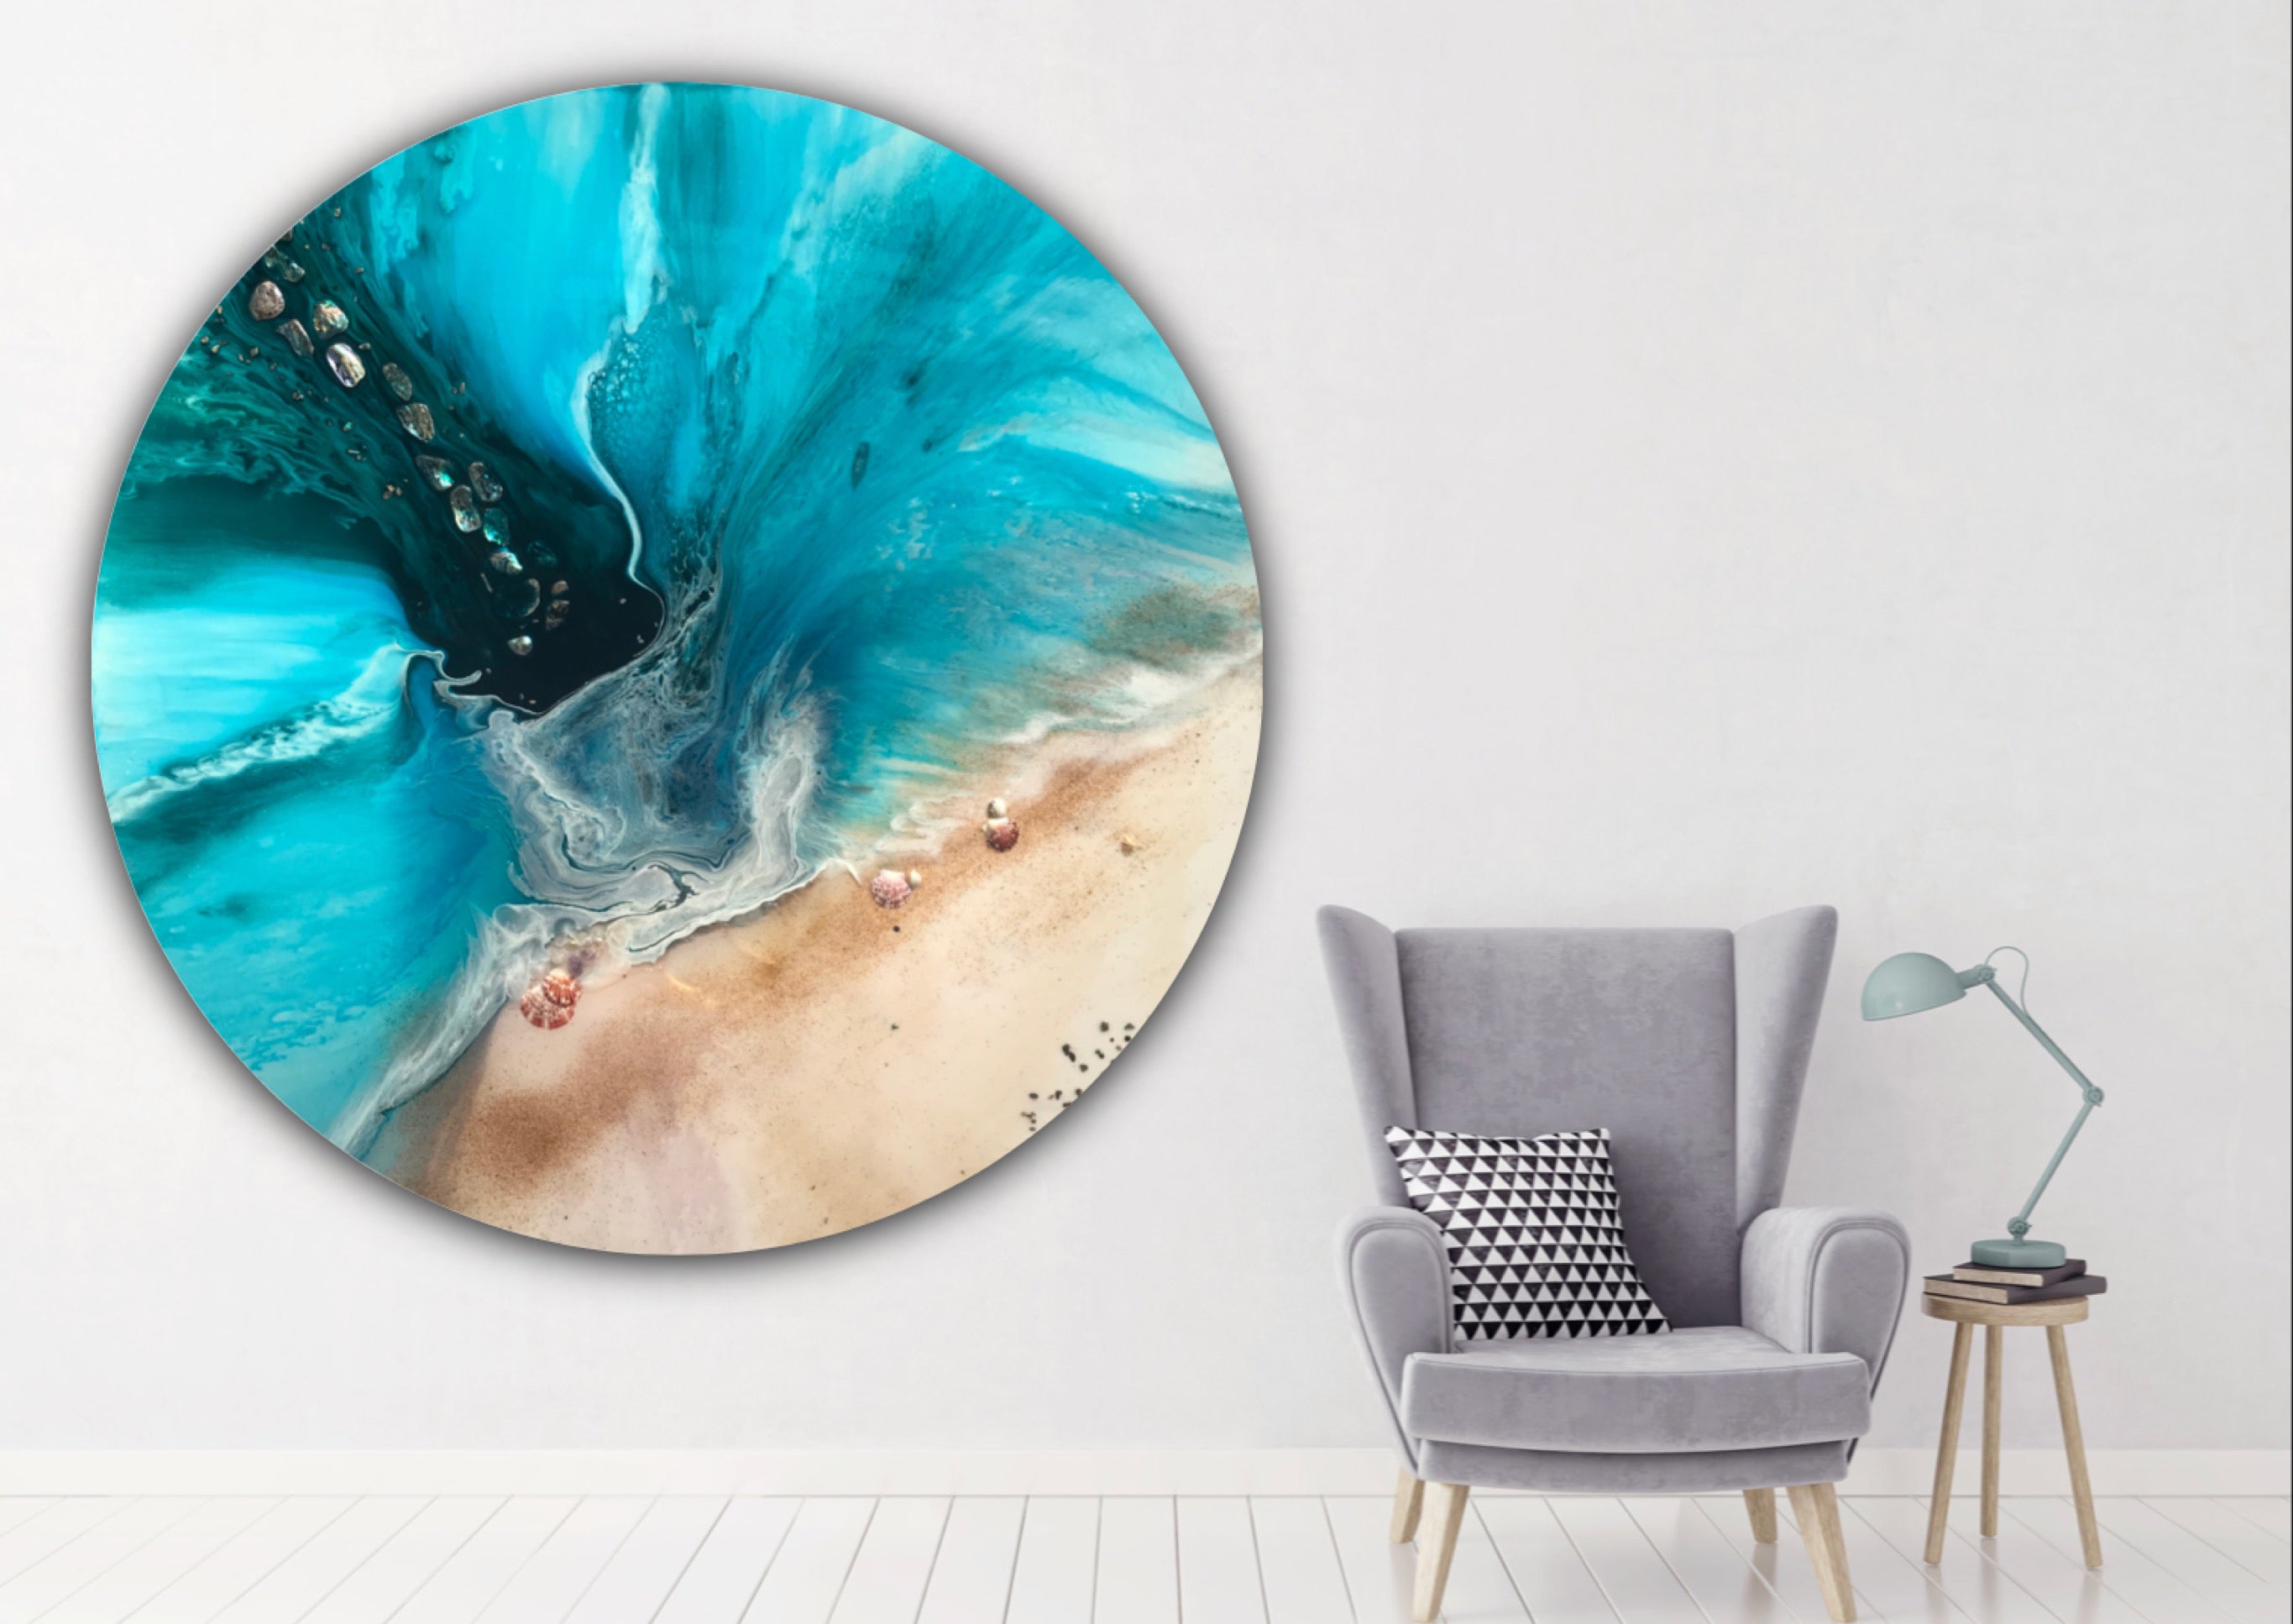 Abstract Seascape. Teal Ocean Round. Rise Above. Art Print. Antuanelle 2 Above Portal Round Contemporary Beach Artwork. Perspex Print